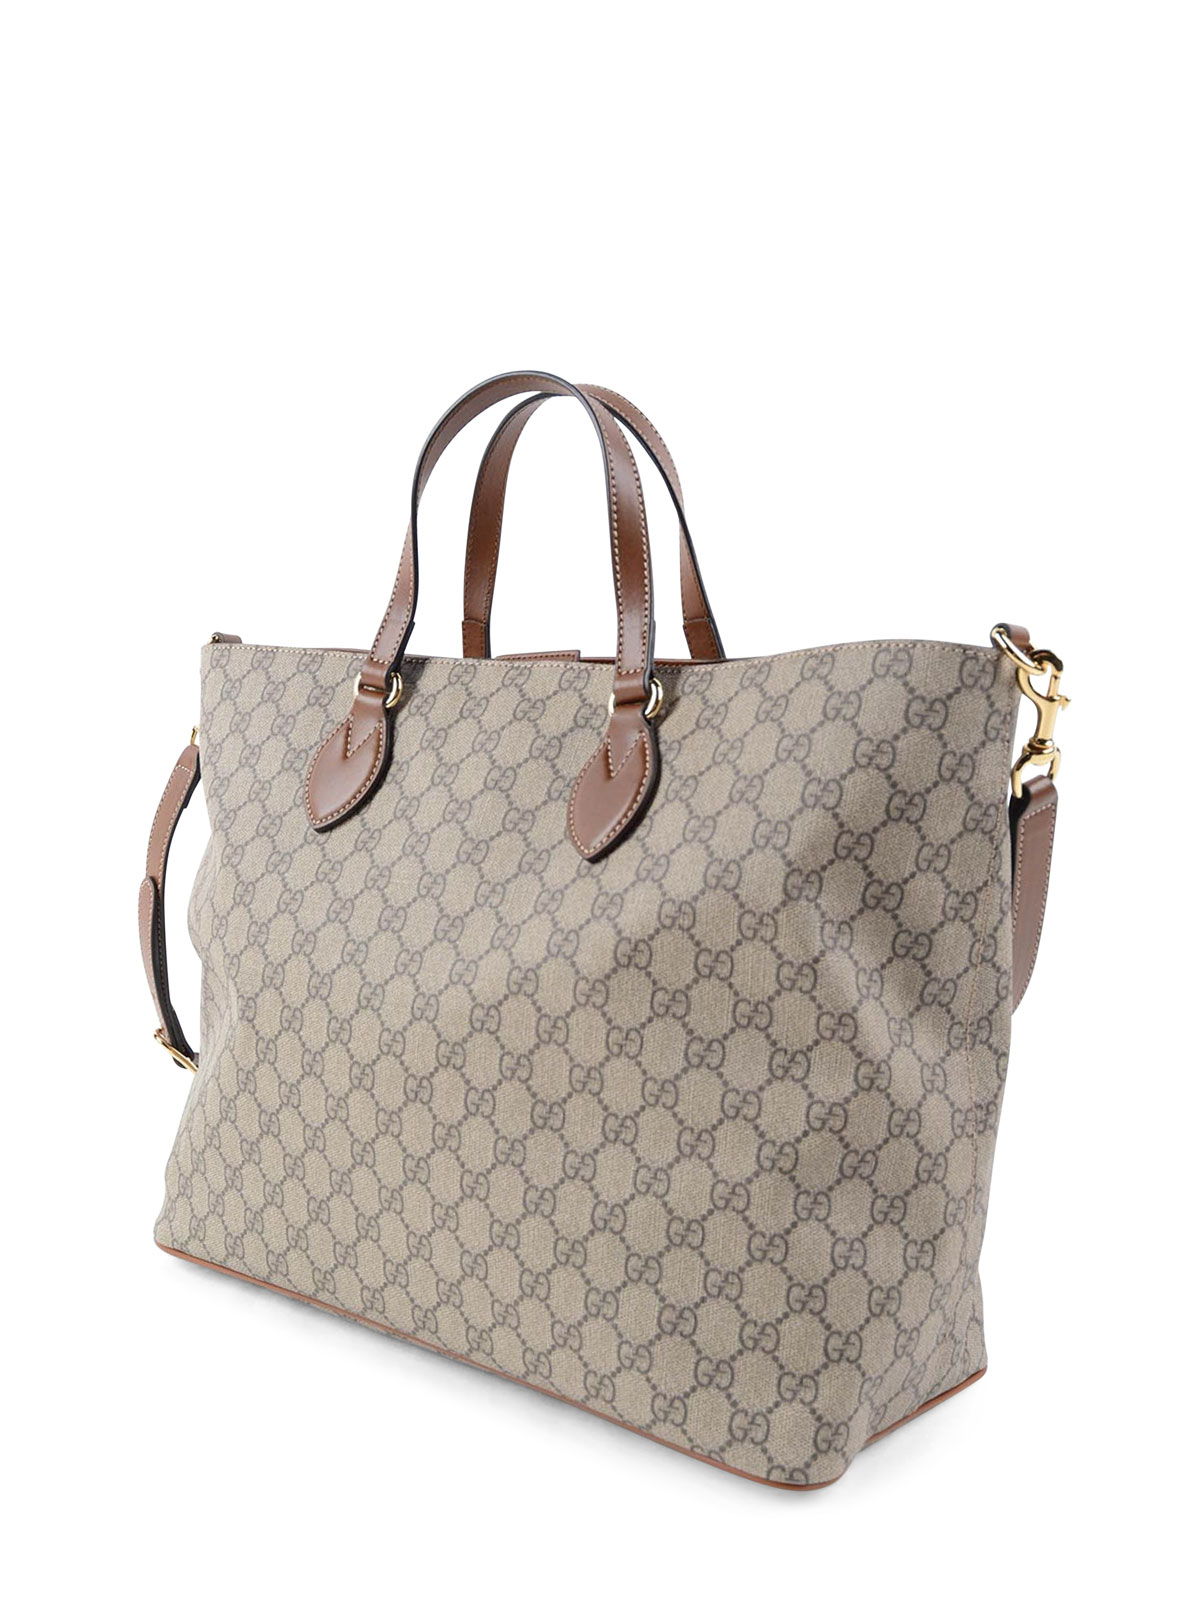 GG Supreme canvas tote bag by Gucci - totes bags | Shop online at 0